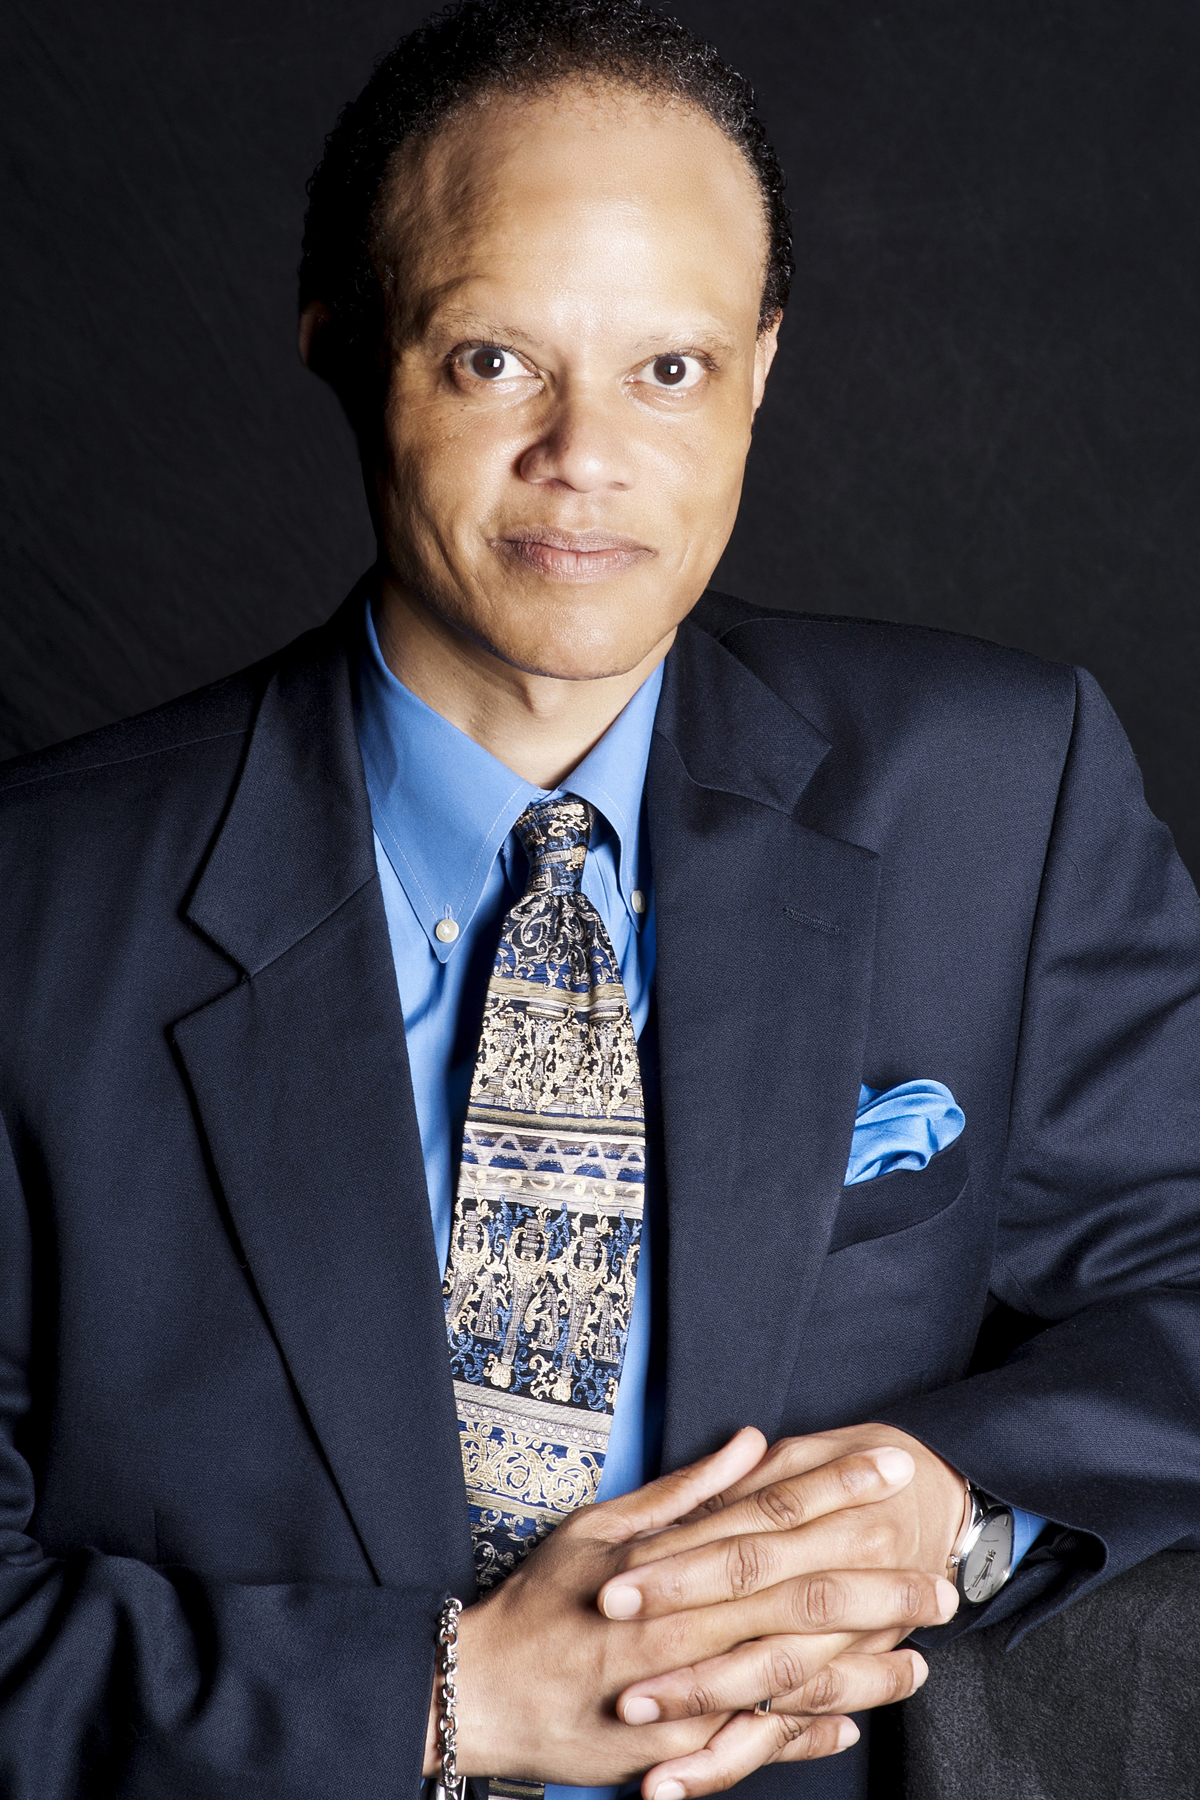 UAFS to Host Acclaimed Speaker Hannibal B. Johnson for Lecture